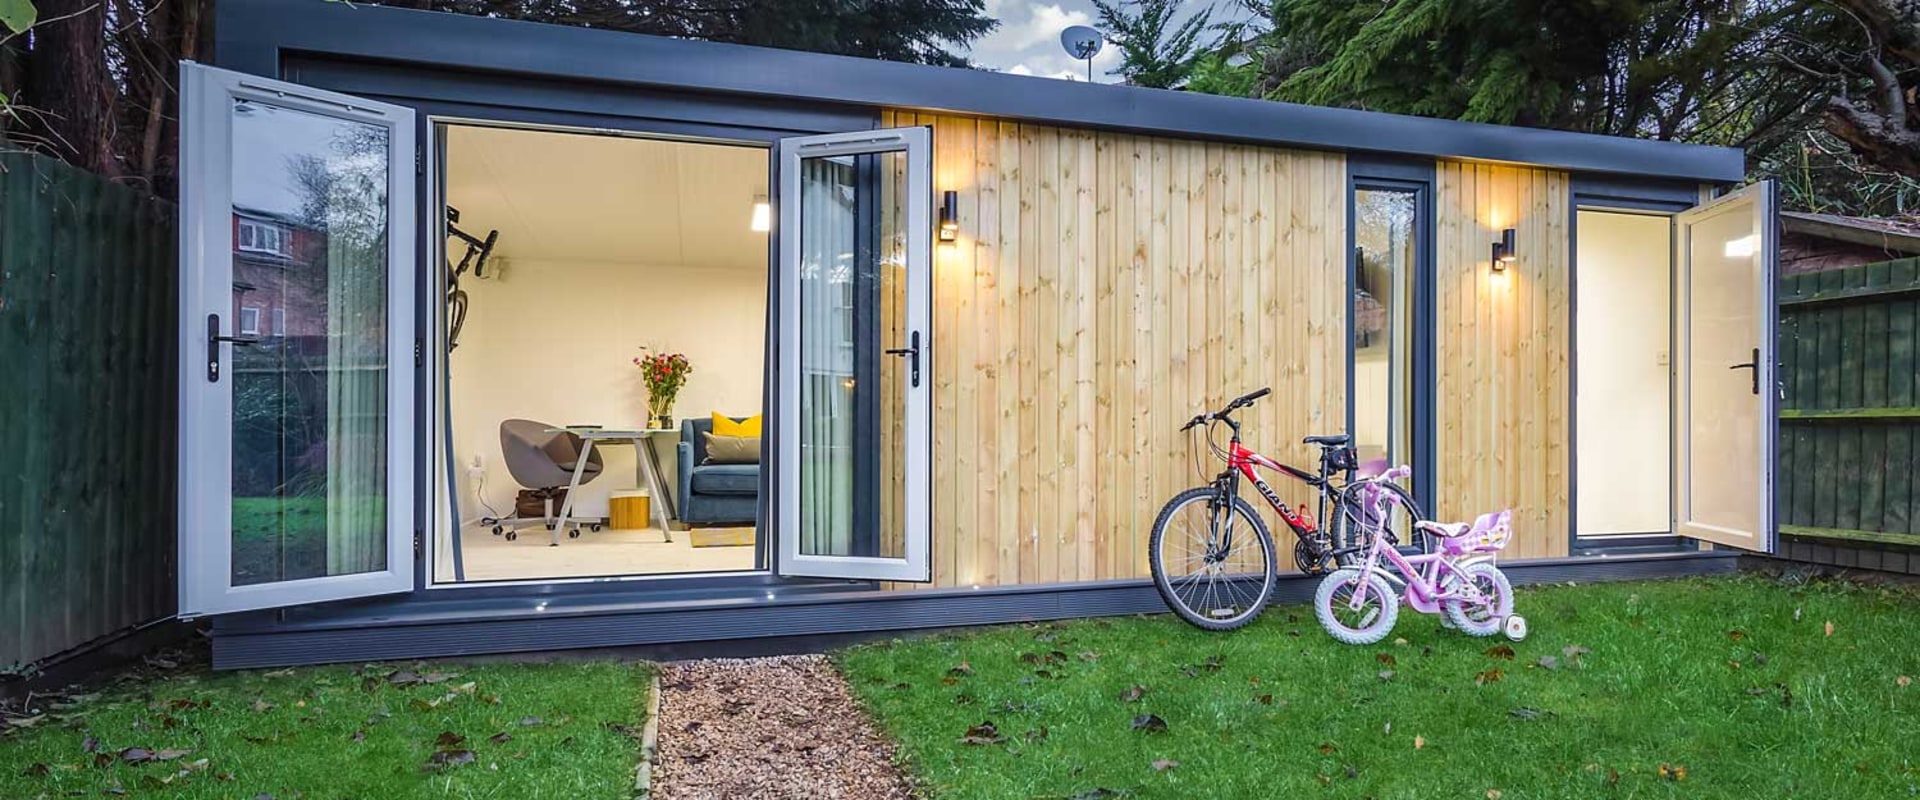 How to Enhance Your Outdoor Living Space with Sheds and Storage Buildings